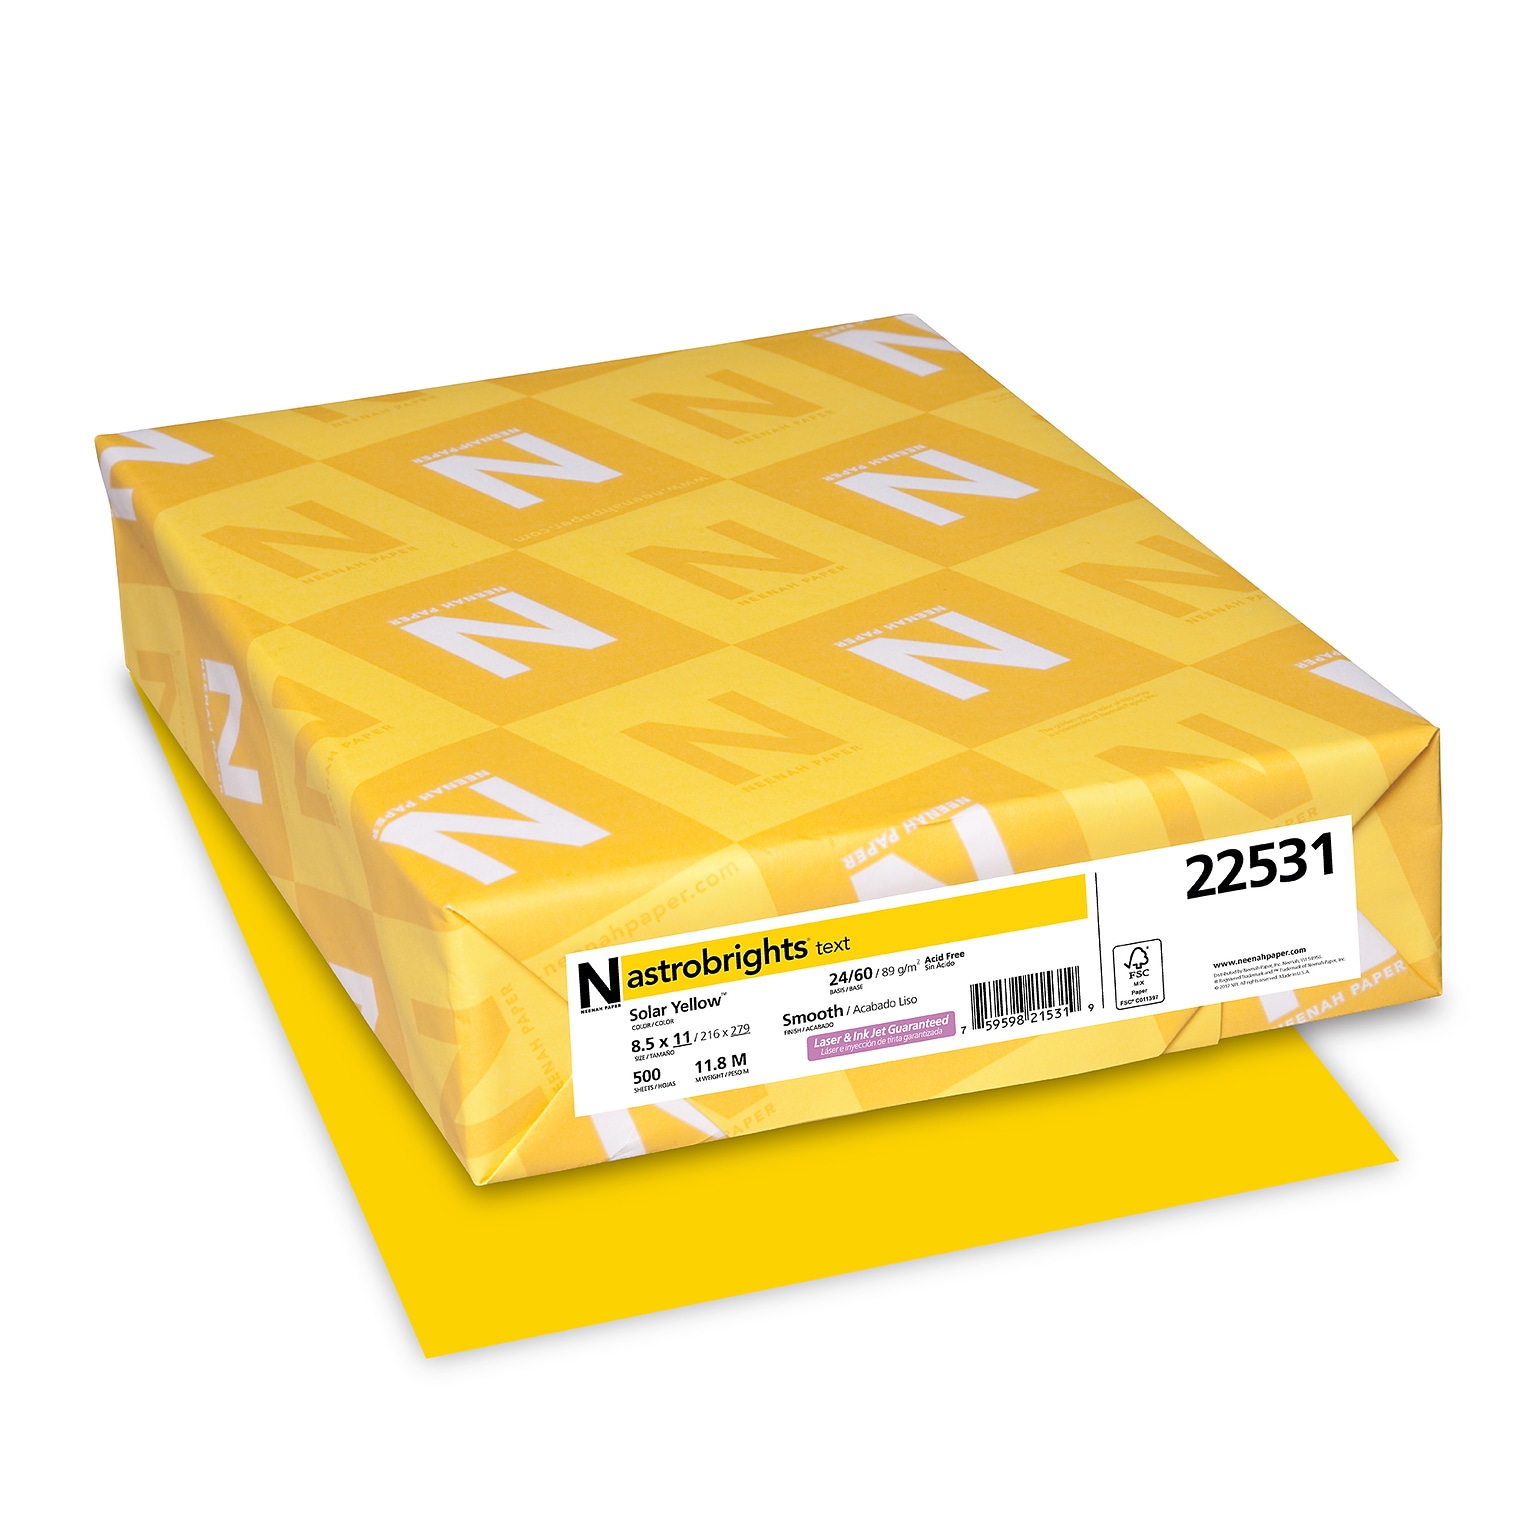 Astrobrights Colored Paper, 24 lbs., 8.5 x 11, Solar Yellow, 500 Sheets/Ream (22531)